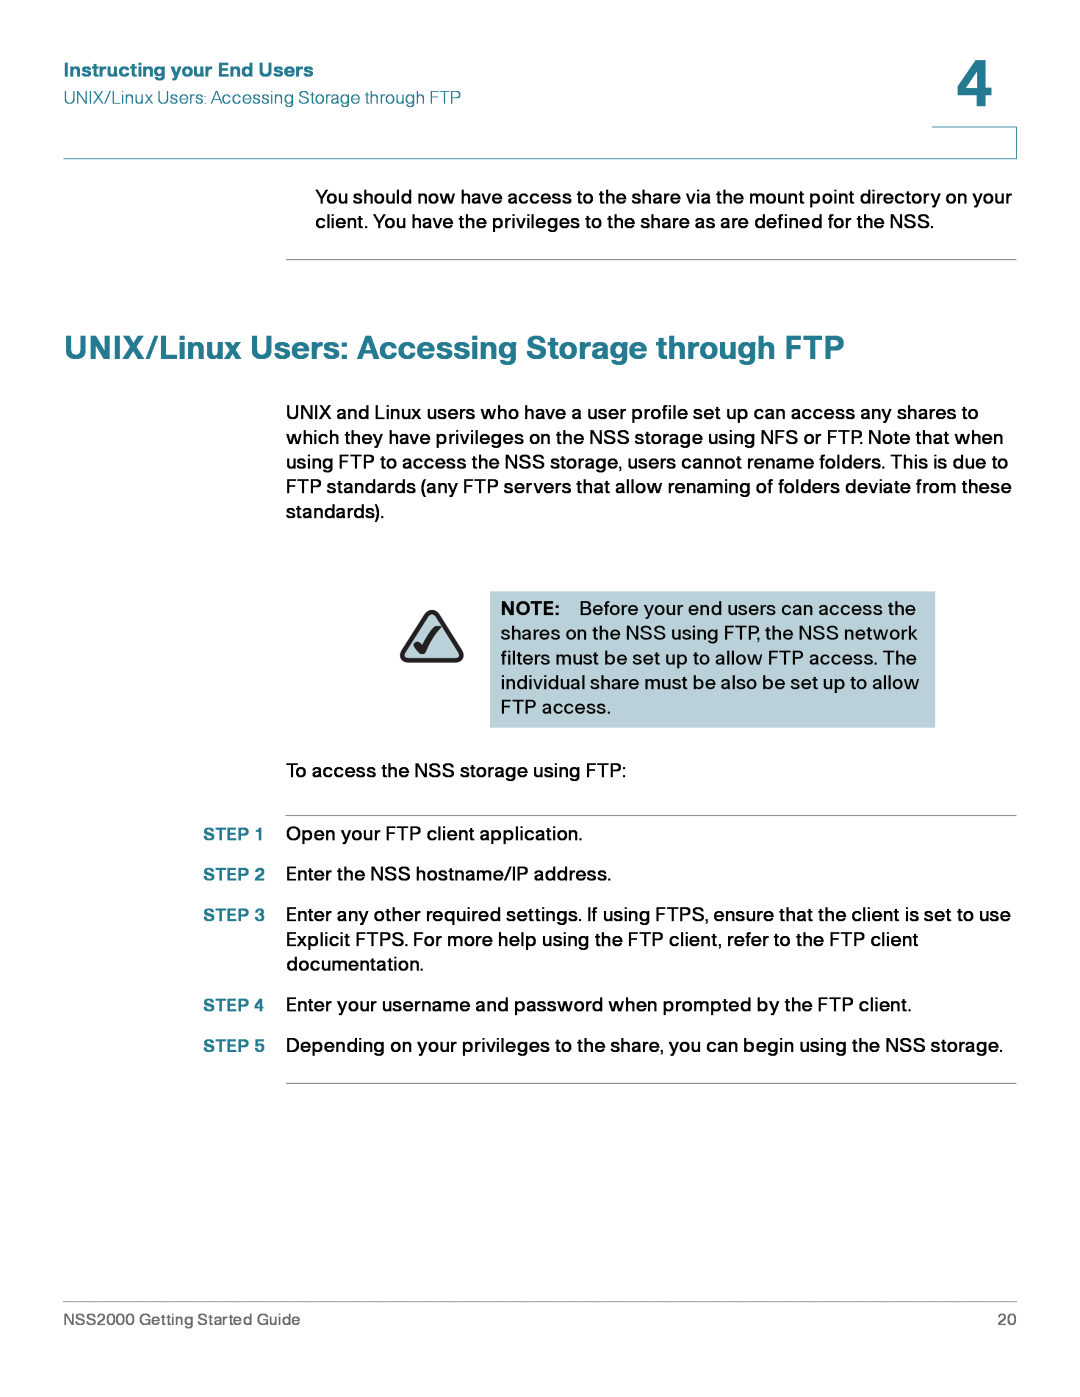 Cisco Systems NSS2000 Series manual UNIX/Linux Users Accessing Storage through FTP, Instructing your End Users 